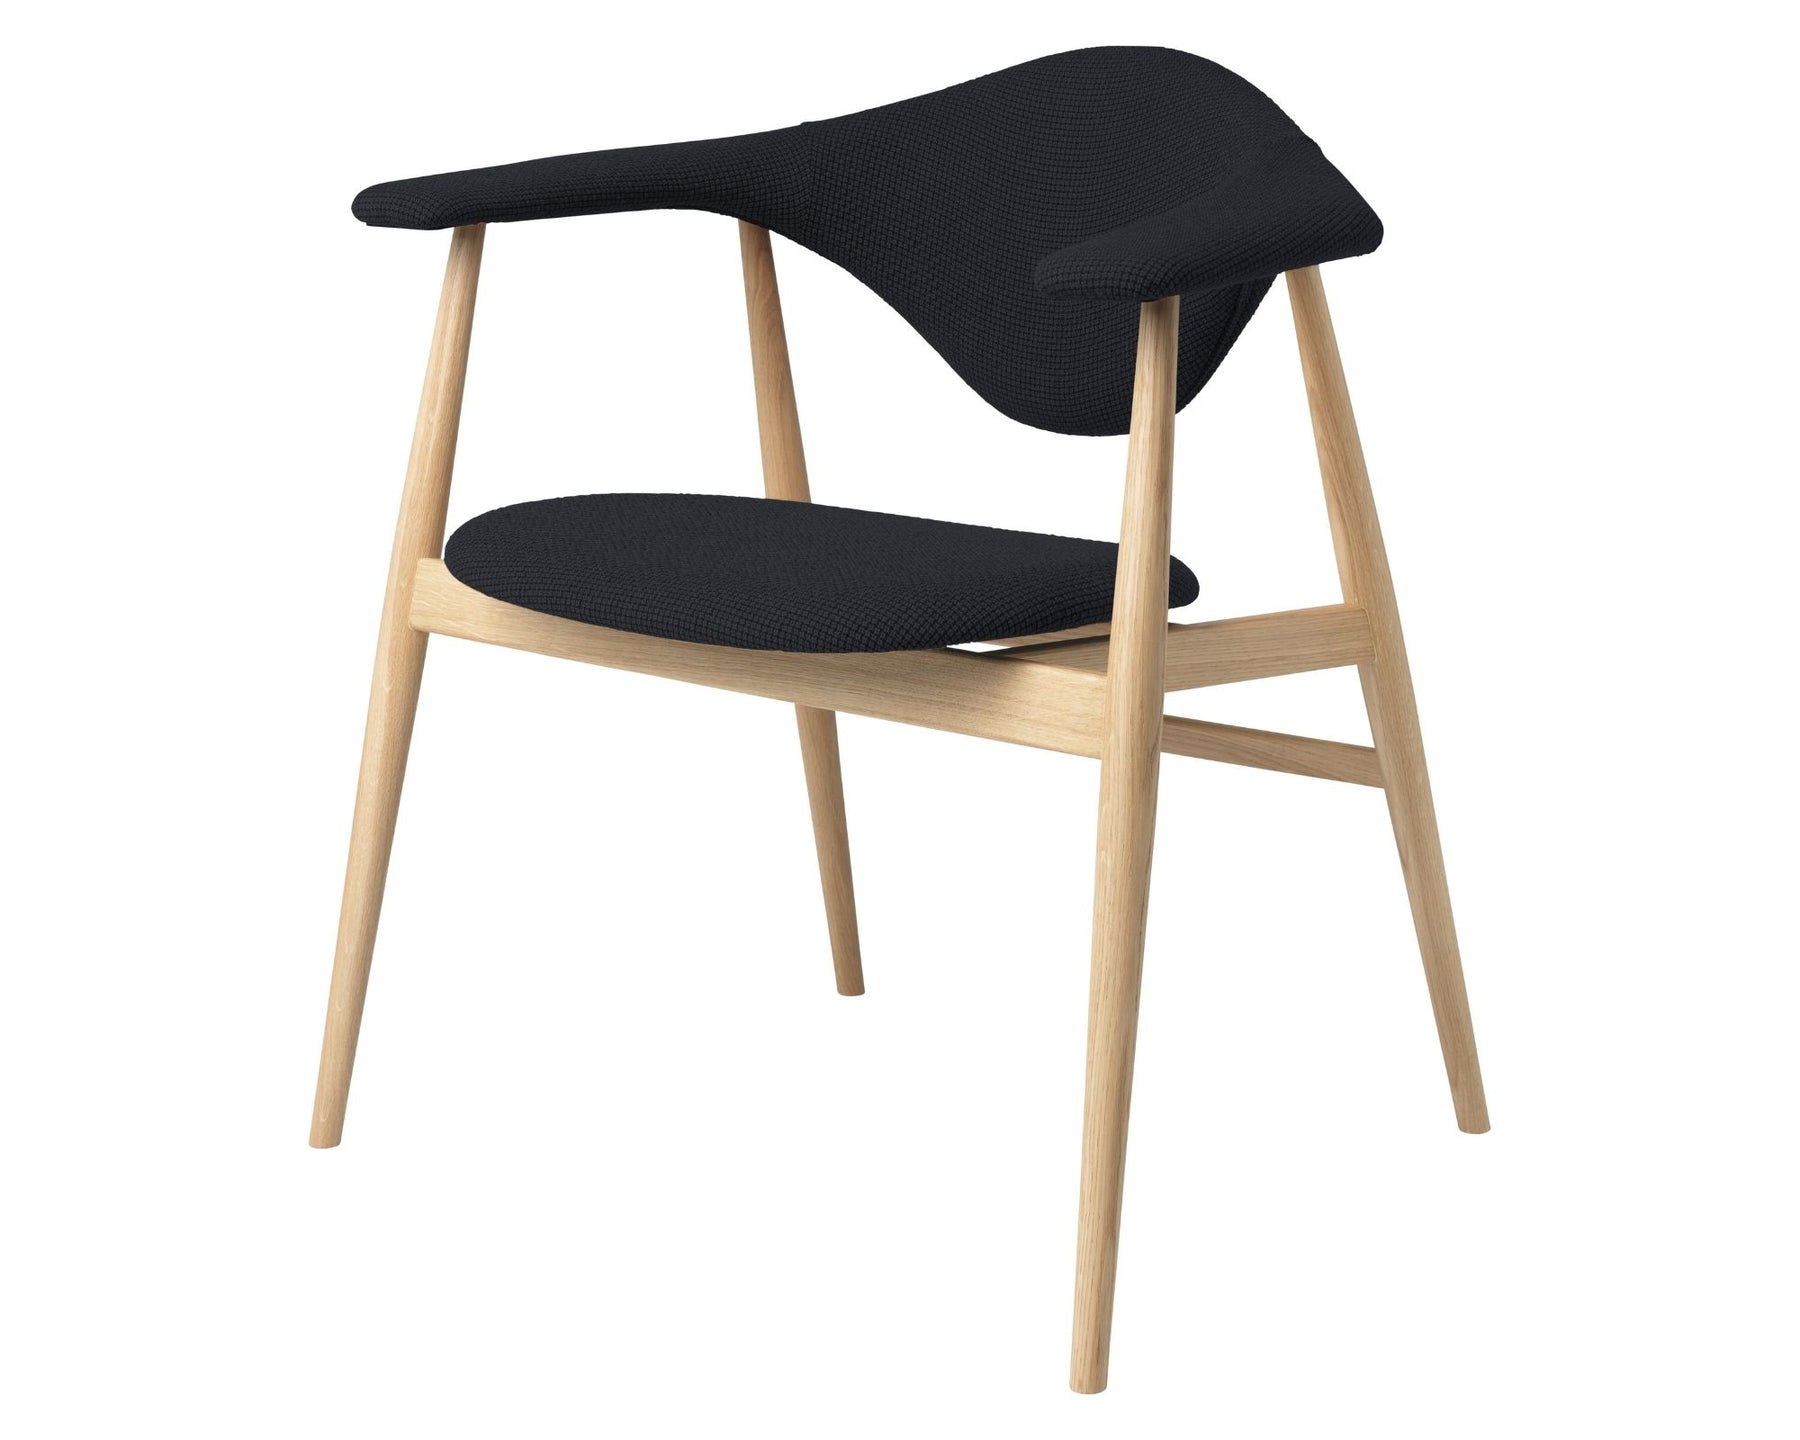 Gubi Masculo Dining Chair | DSHOP